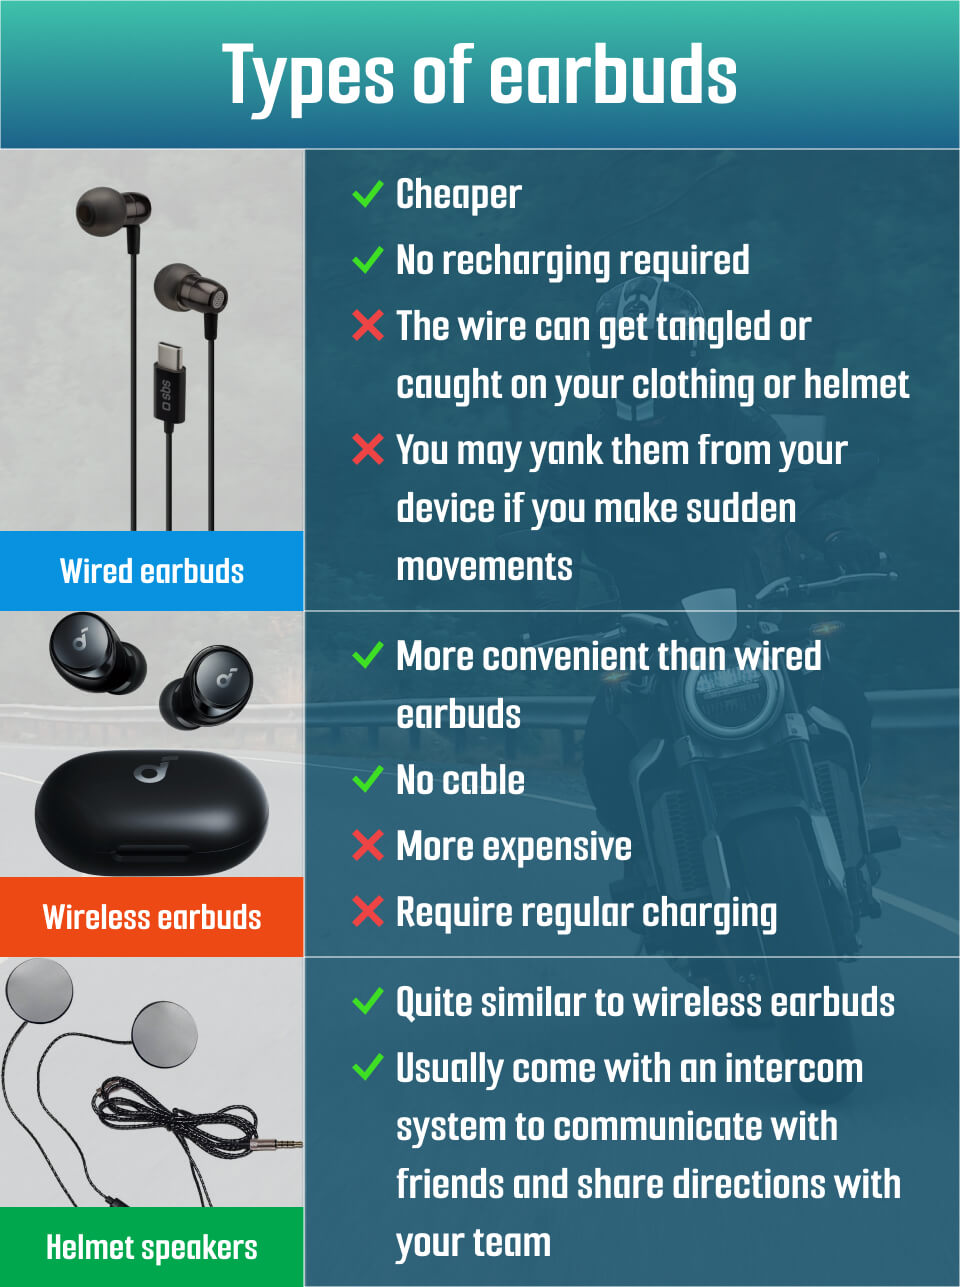 Select types of earbuds